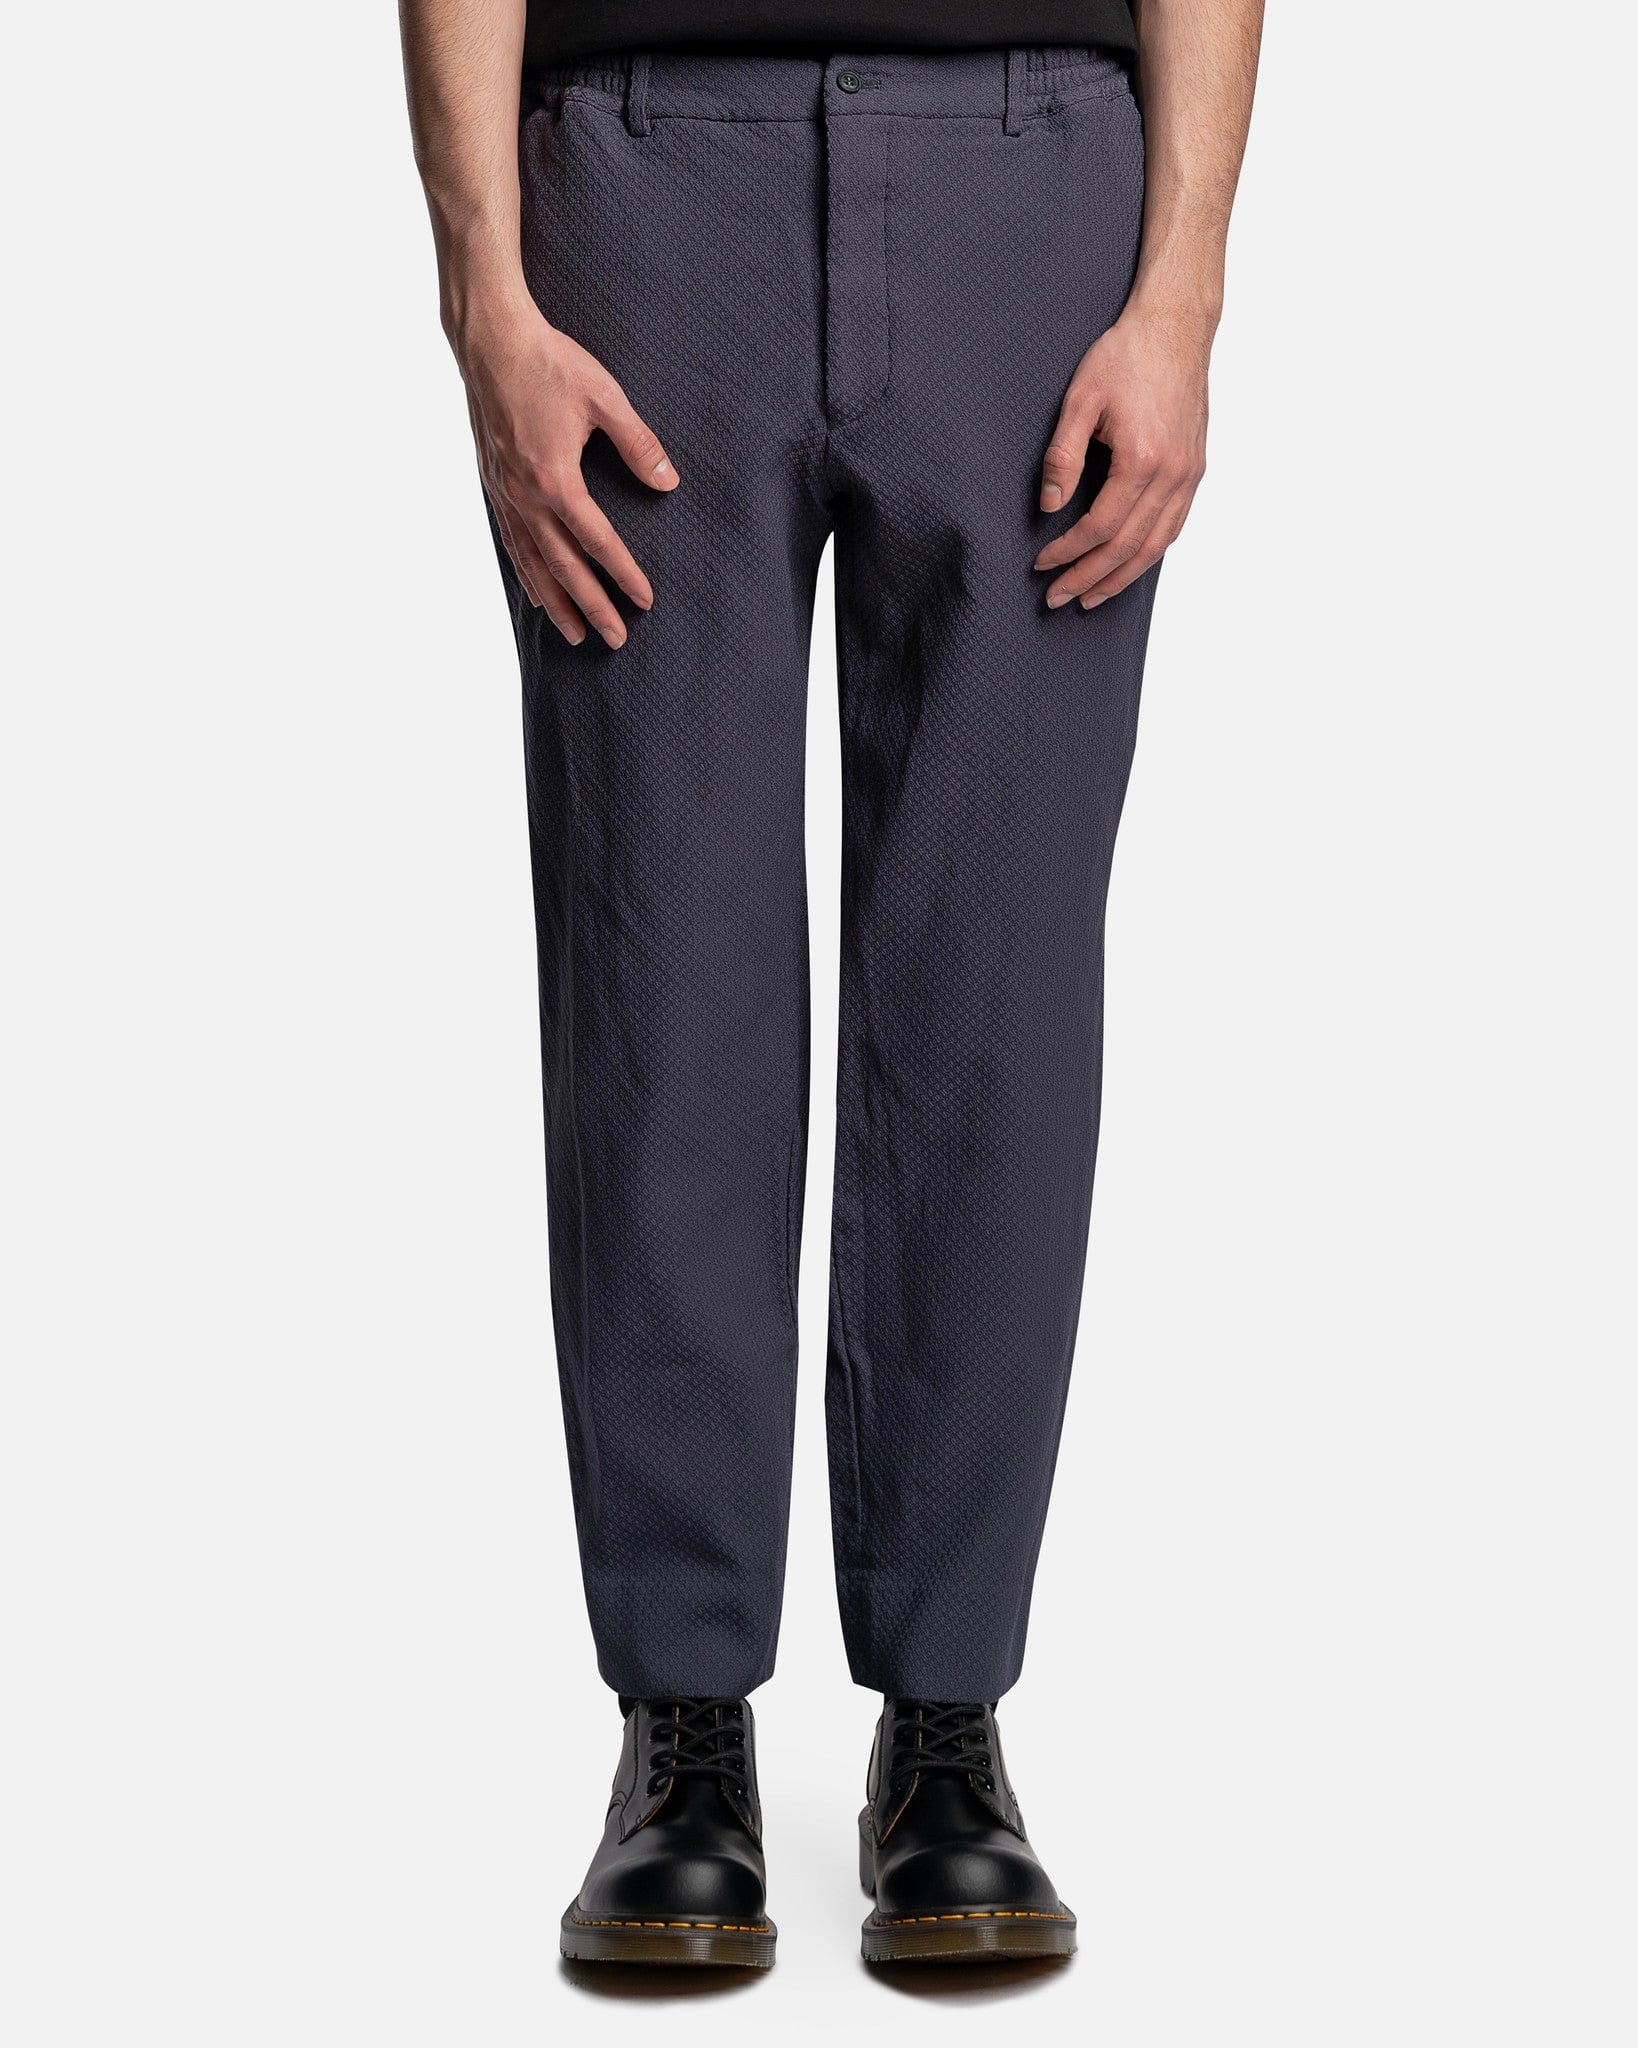 Tapered Leg Trousers in Charcoal Grey